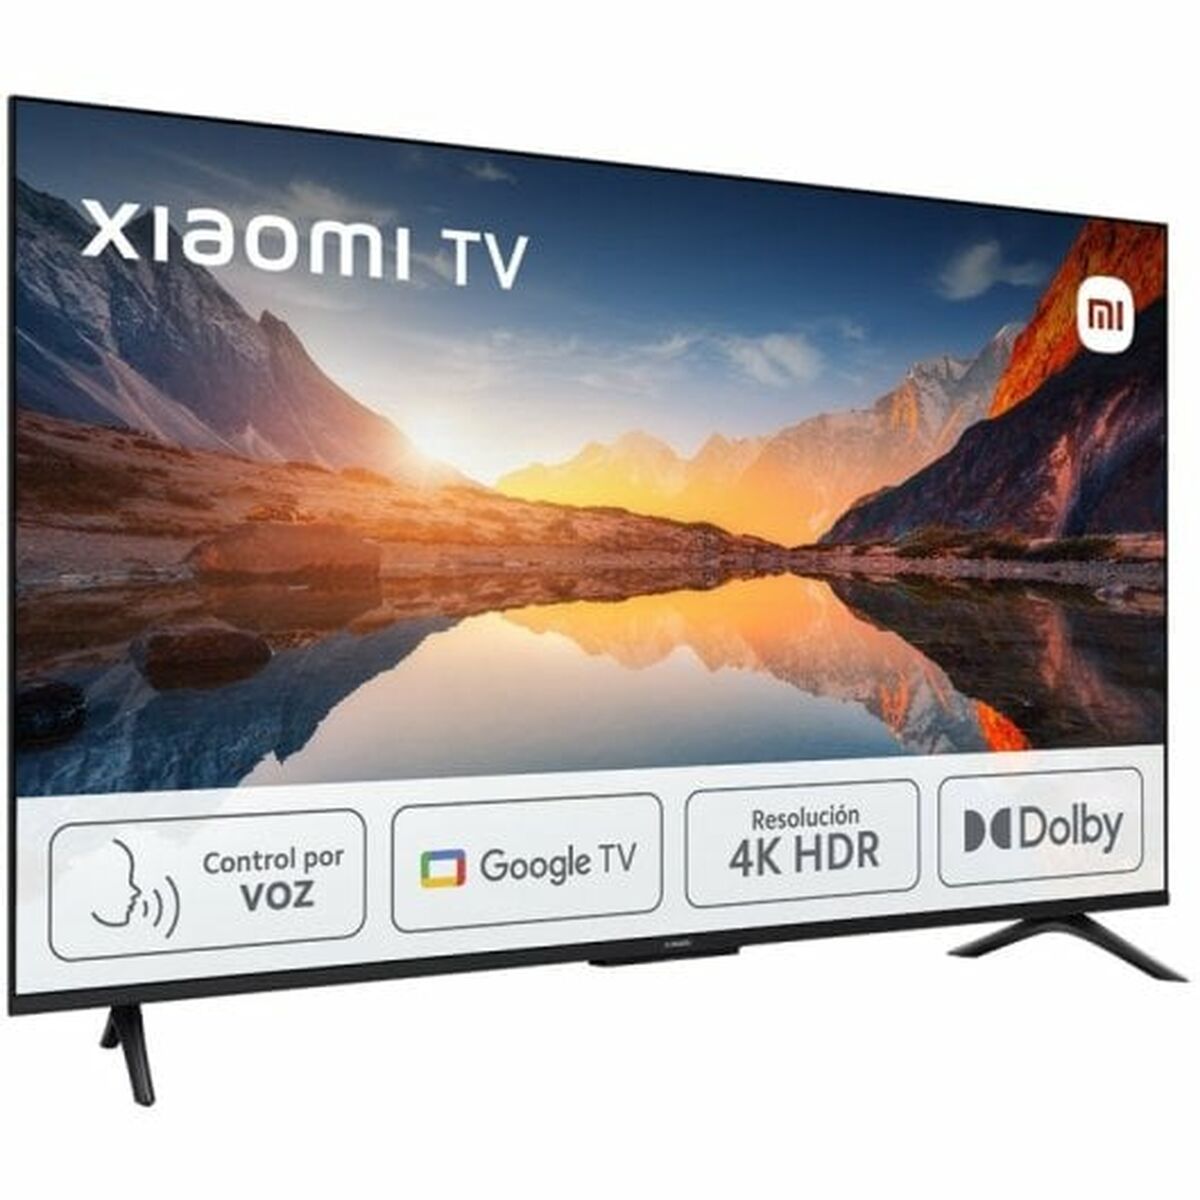 Smart TV Xiaomi A 2025 4K Ultra HD 43" LED, Xiaomi, Electronics, TV, Video and home cinema, smart-tv-xiaomi-a-2025-4k-ultra-hd-43-led, Brand_Xiaomi, category-reference-2609, category-reference-2625, category-reference-2931, category-reference-t-18805, category-reference-t-18827, category-reference-t-19653, cinema and television, Condition_NEW, entertainment, Price_300 - 400, RiotNook